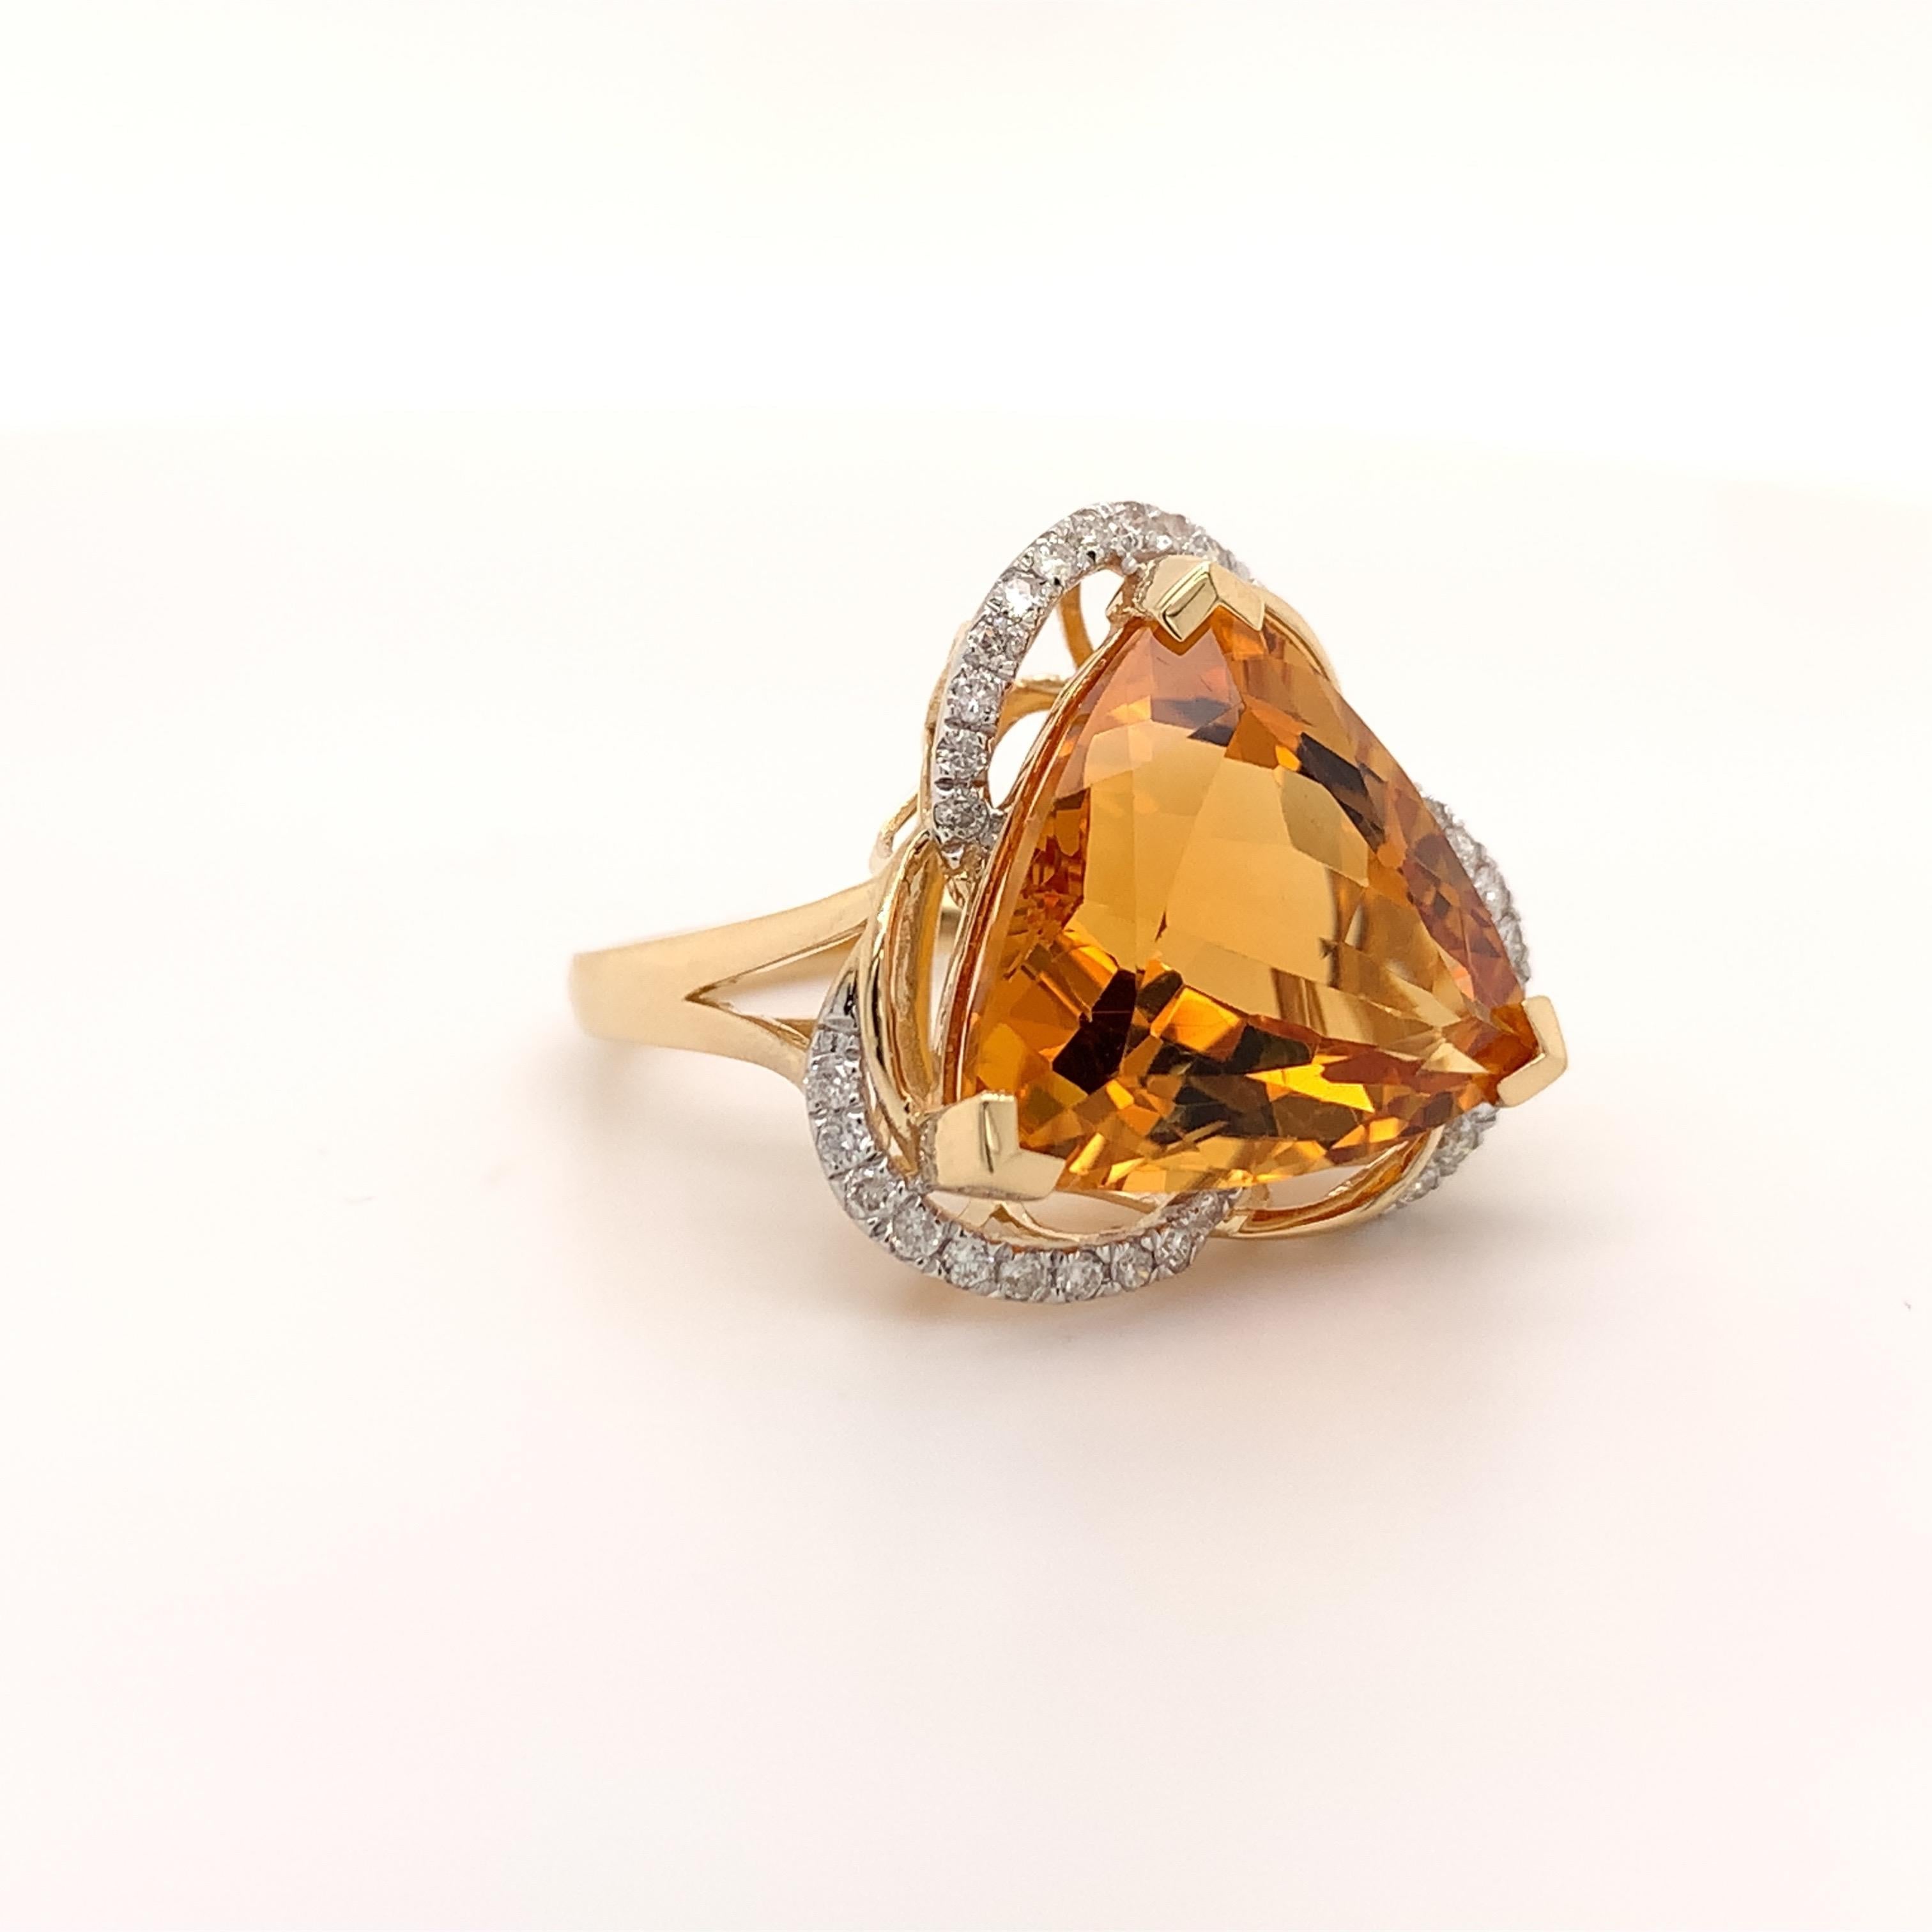 Stunning citrine cocktail ring. High brilliance, trillion cuts, transparent clean, rich golden honey tone 9.50 carats natural citrine mounted on high profile open basket with 3 knife prongs, accented with a round brilliant cut diamonds. Handcrafted